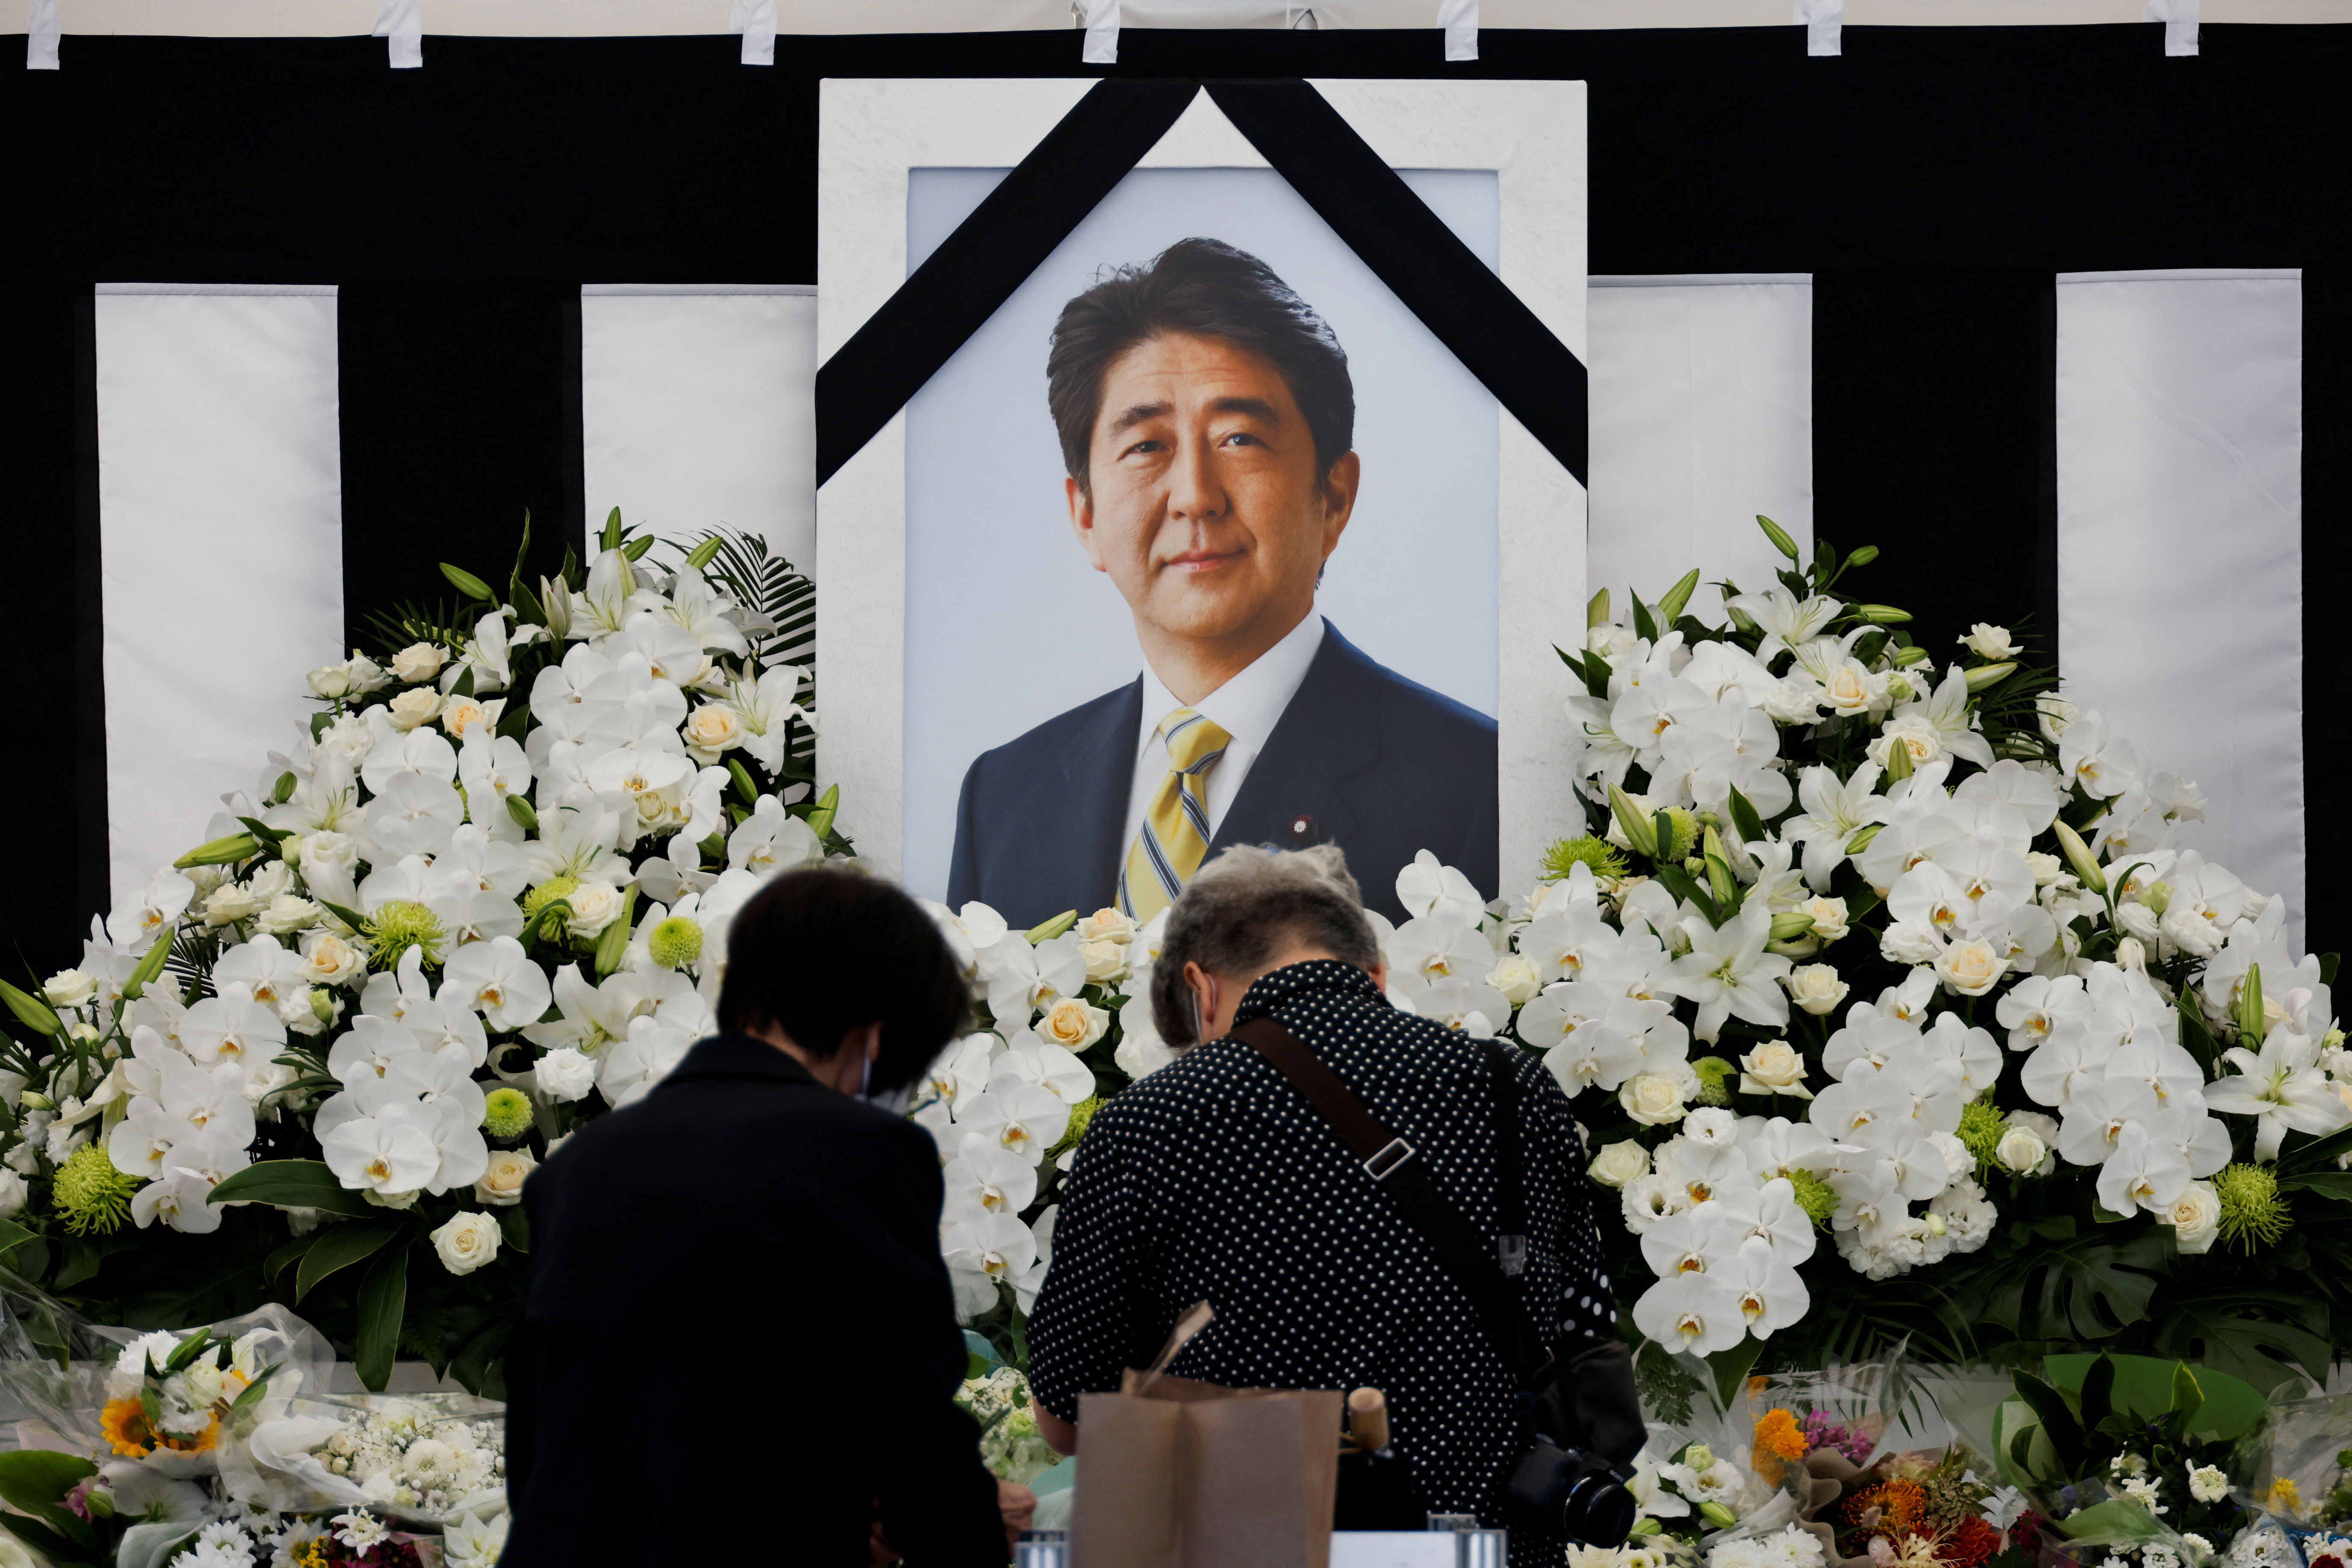 State funeral for former Prime Minister Shinzo Abe